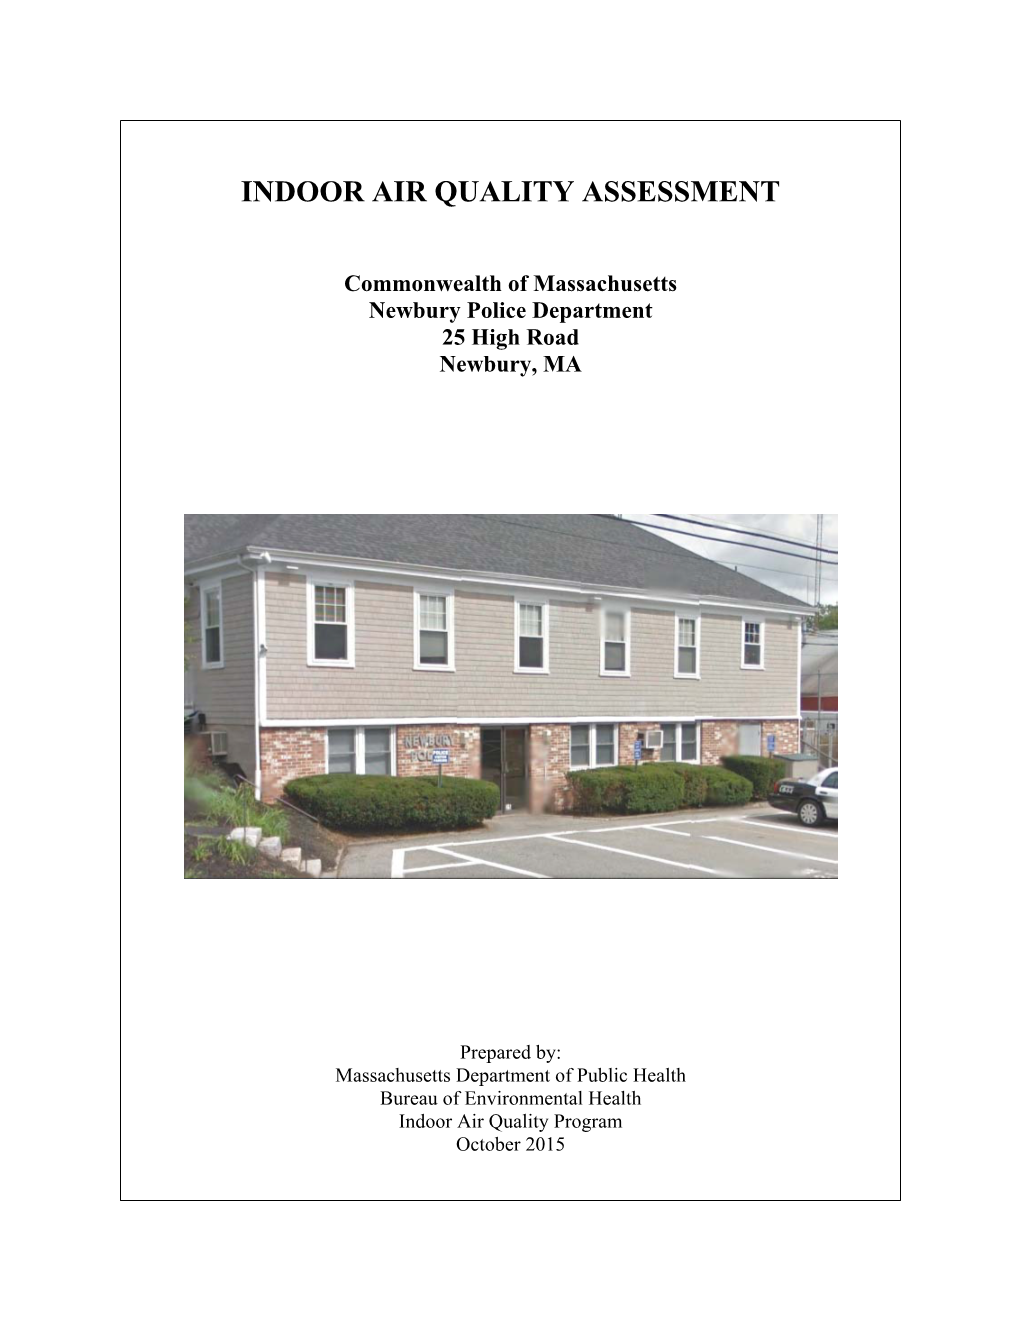 Indoor Air Quality Assessment